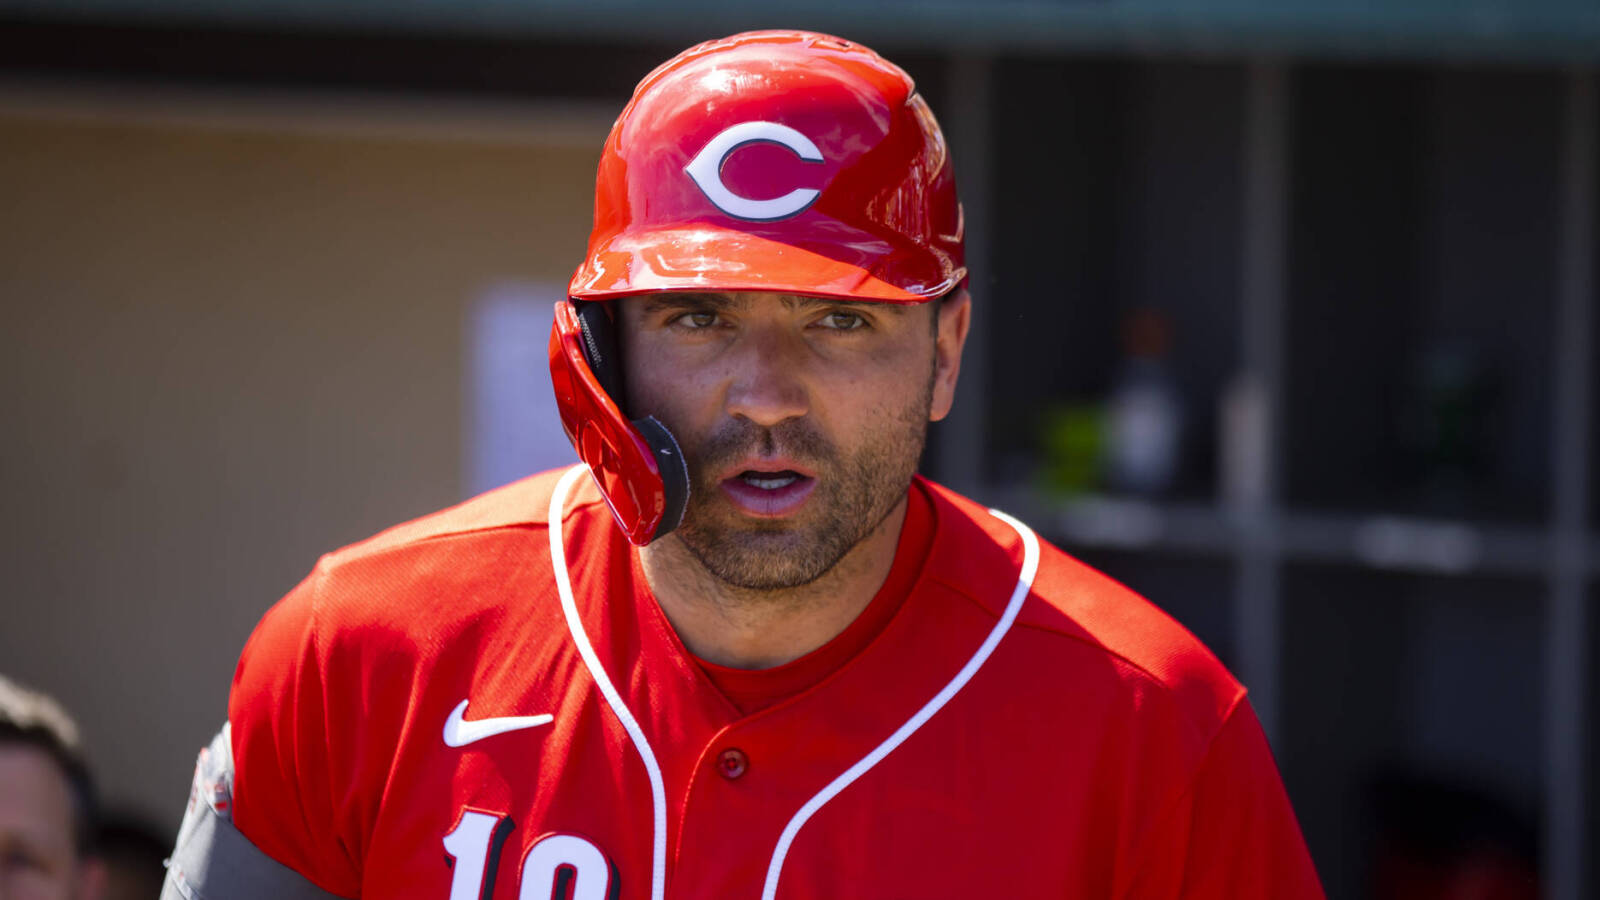 Joey Votto planning to fly halfway around world for first tattoo